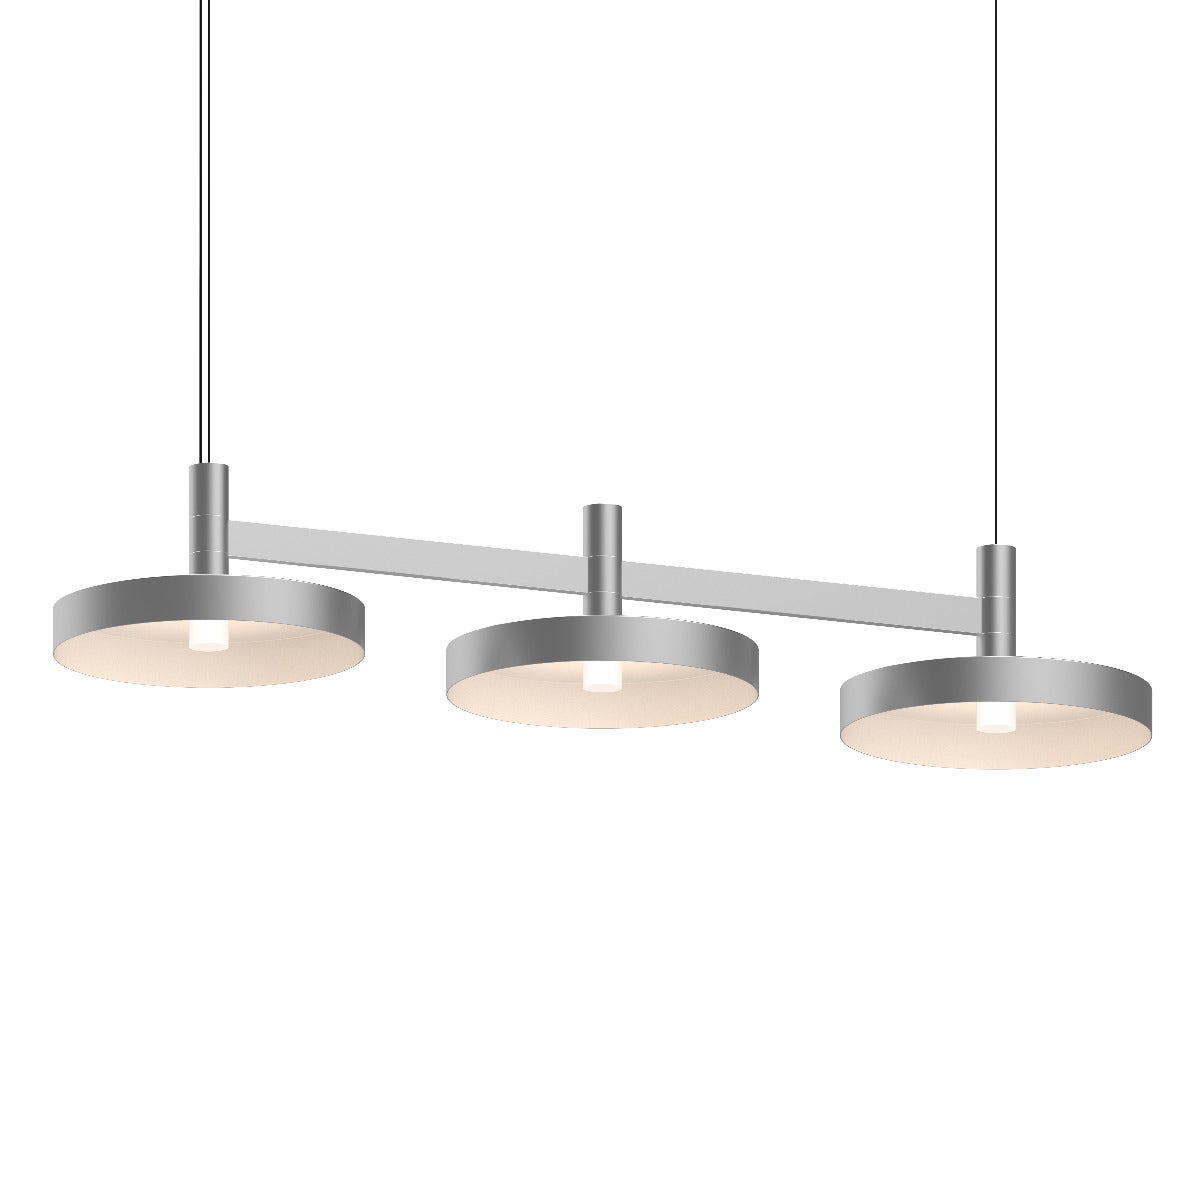 Sonneman Systema Staccato 3-Light Linear Pendant w/Pan Shades